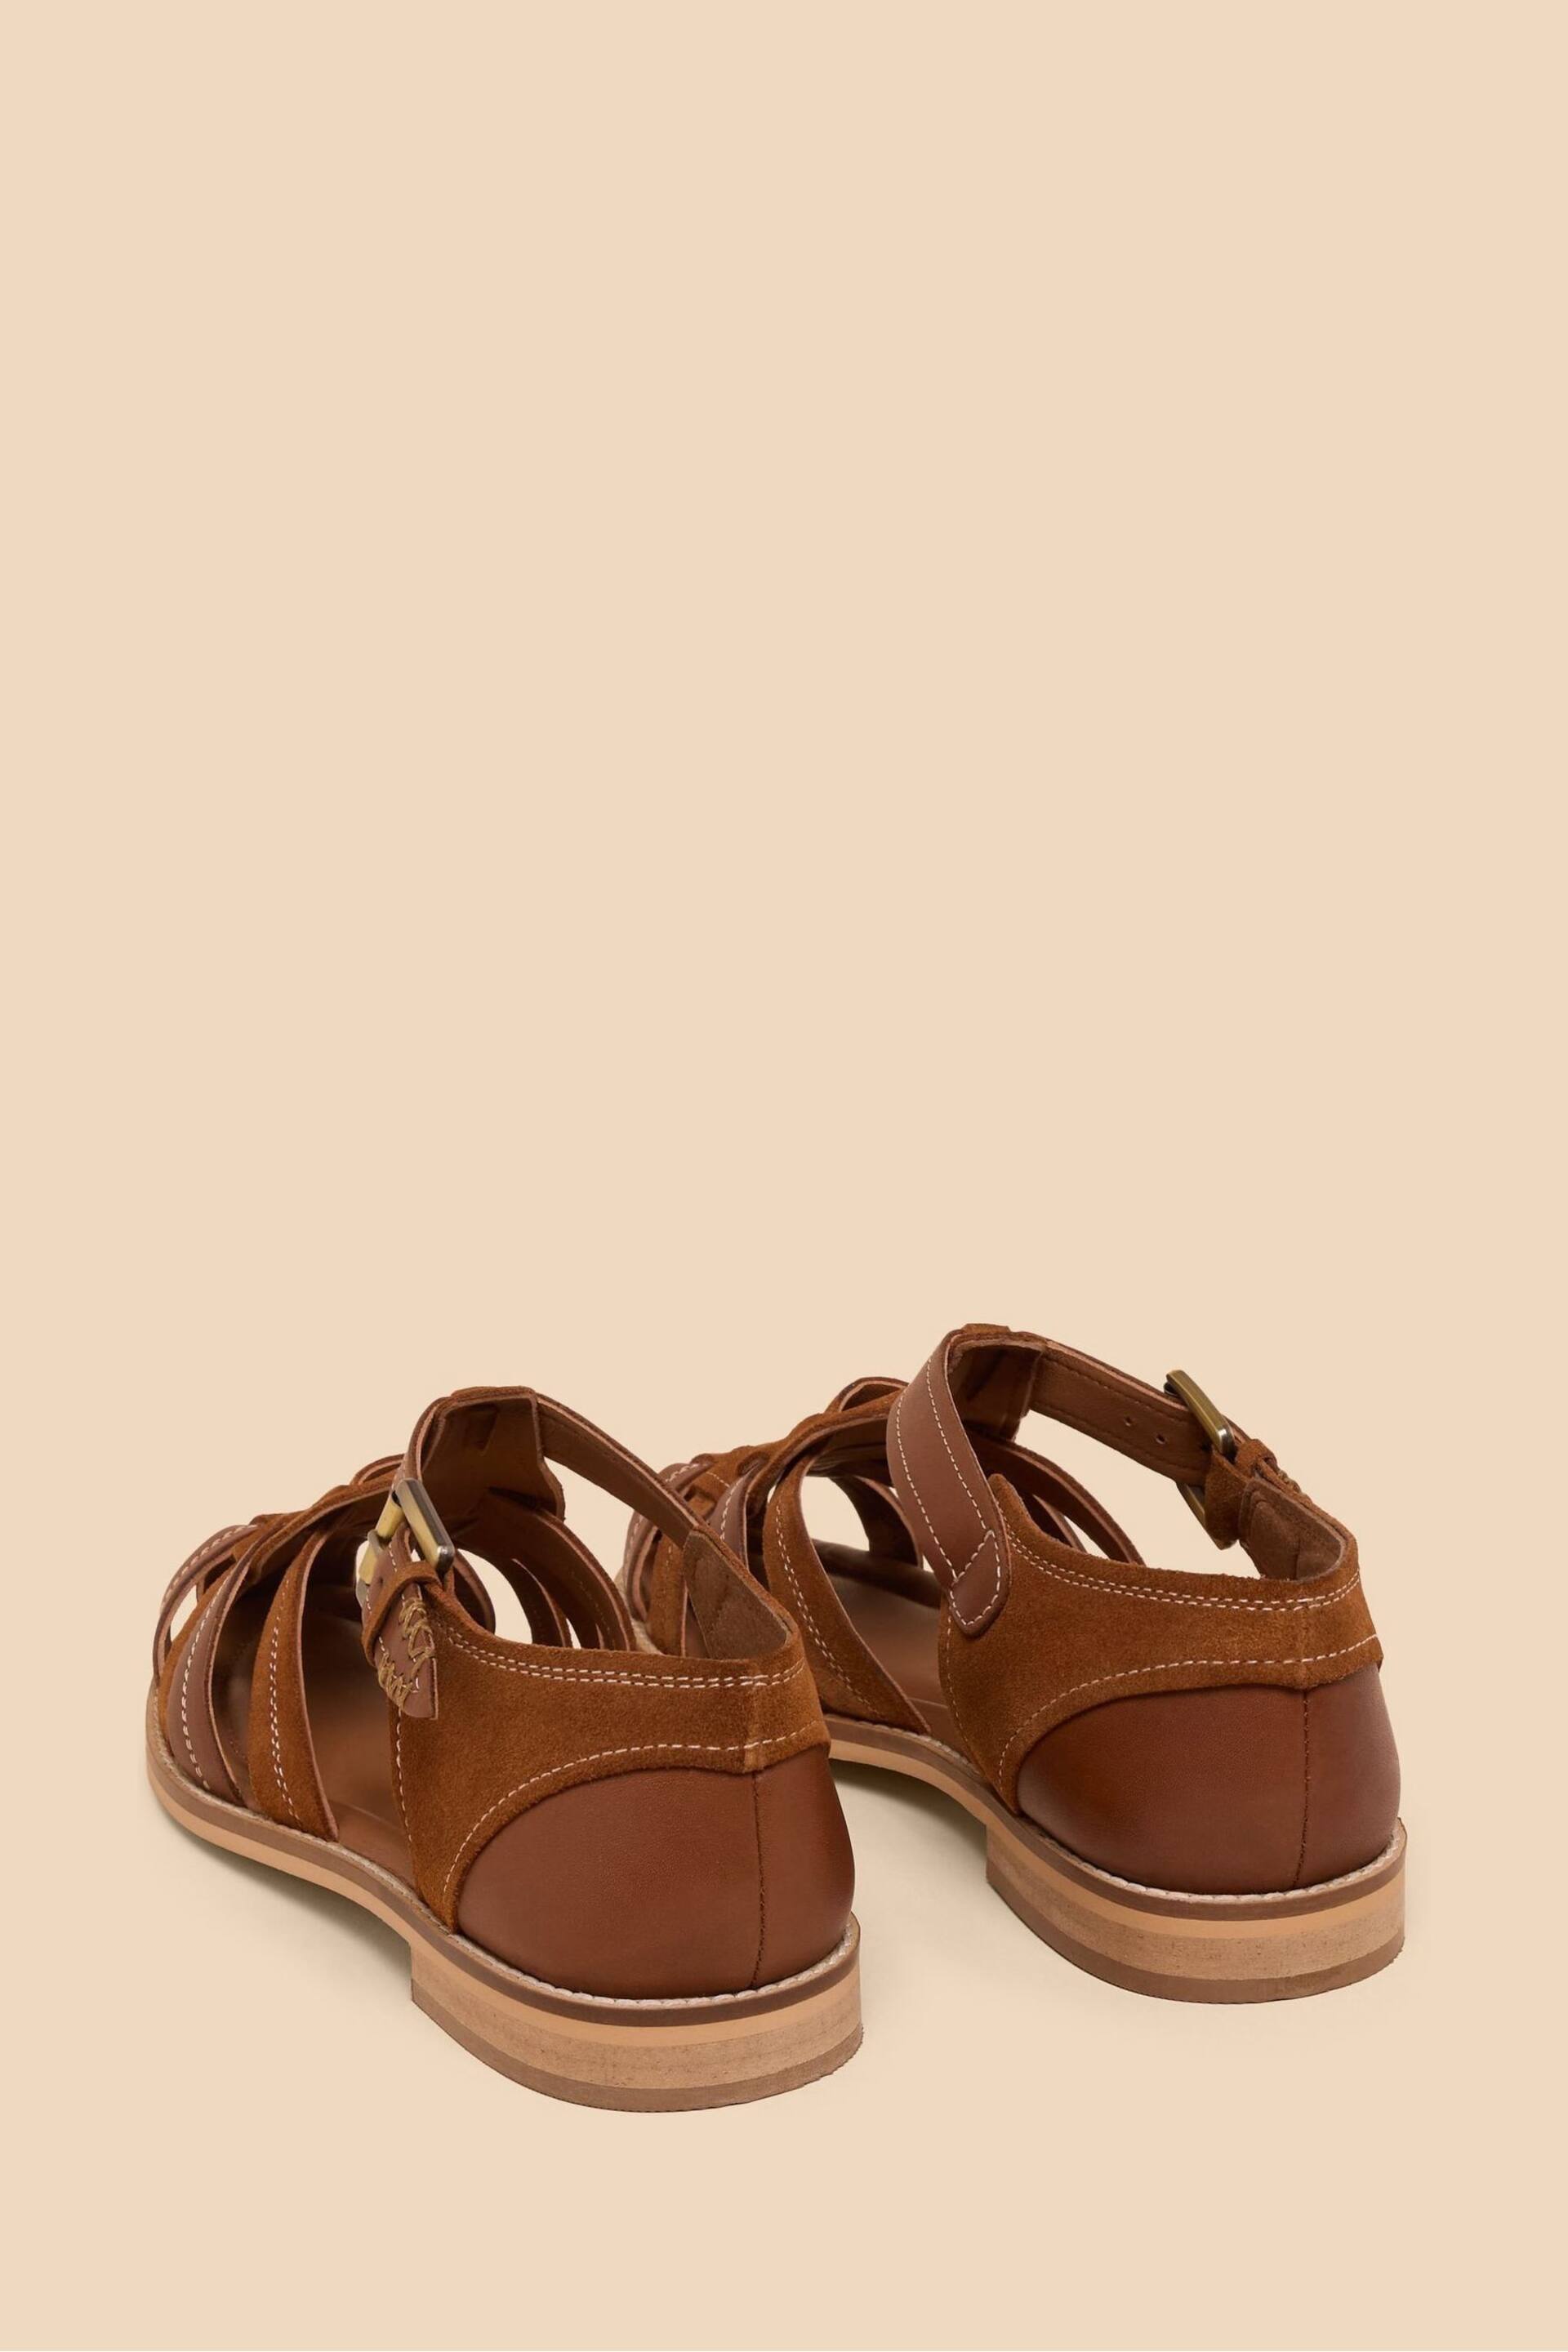 White Stuff Brown Floral Leather Fisherman Sandals - Image 3 of 4